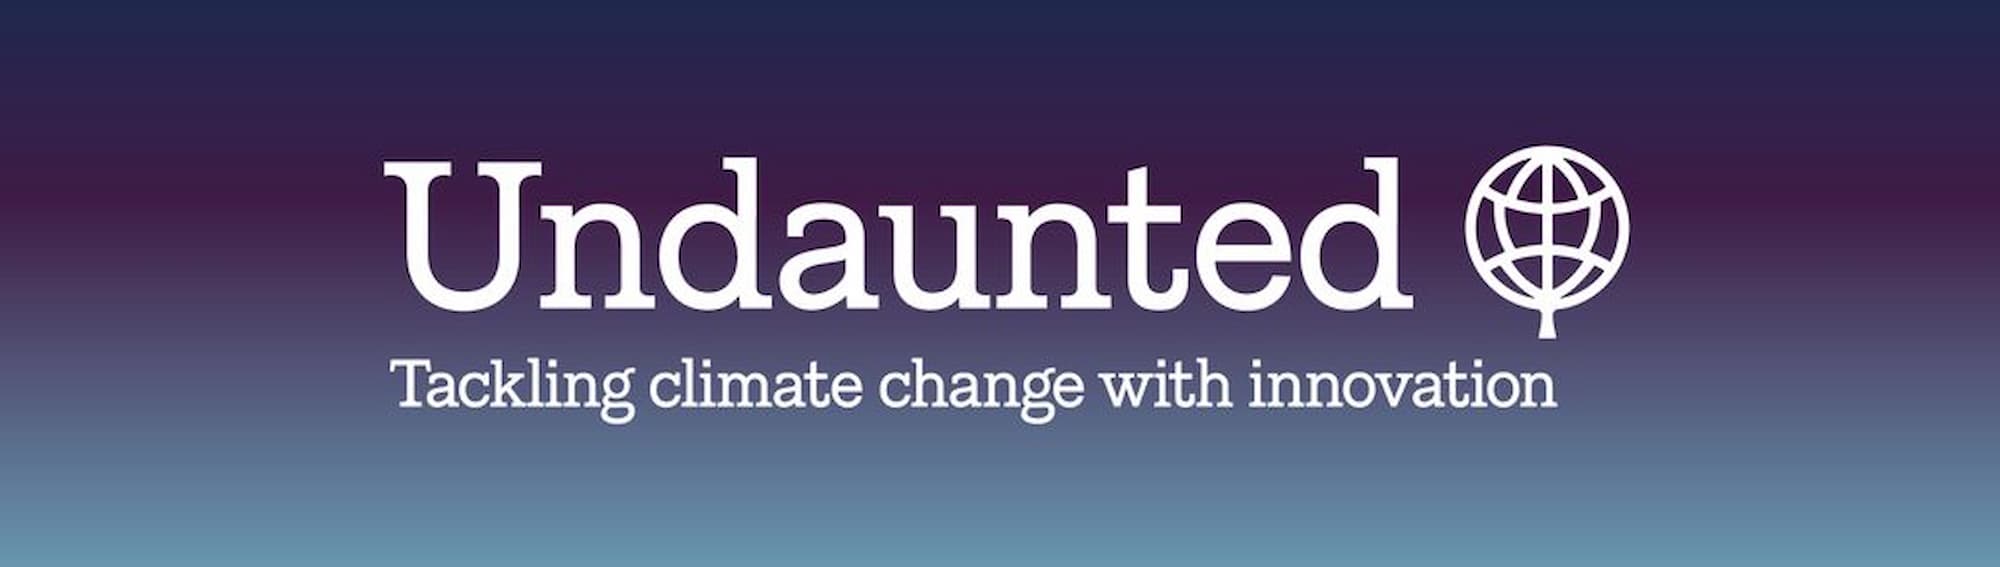 Blue banner with the Undaunted logo - tackling climate change with innovation.